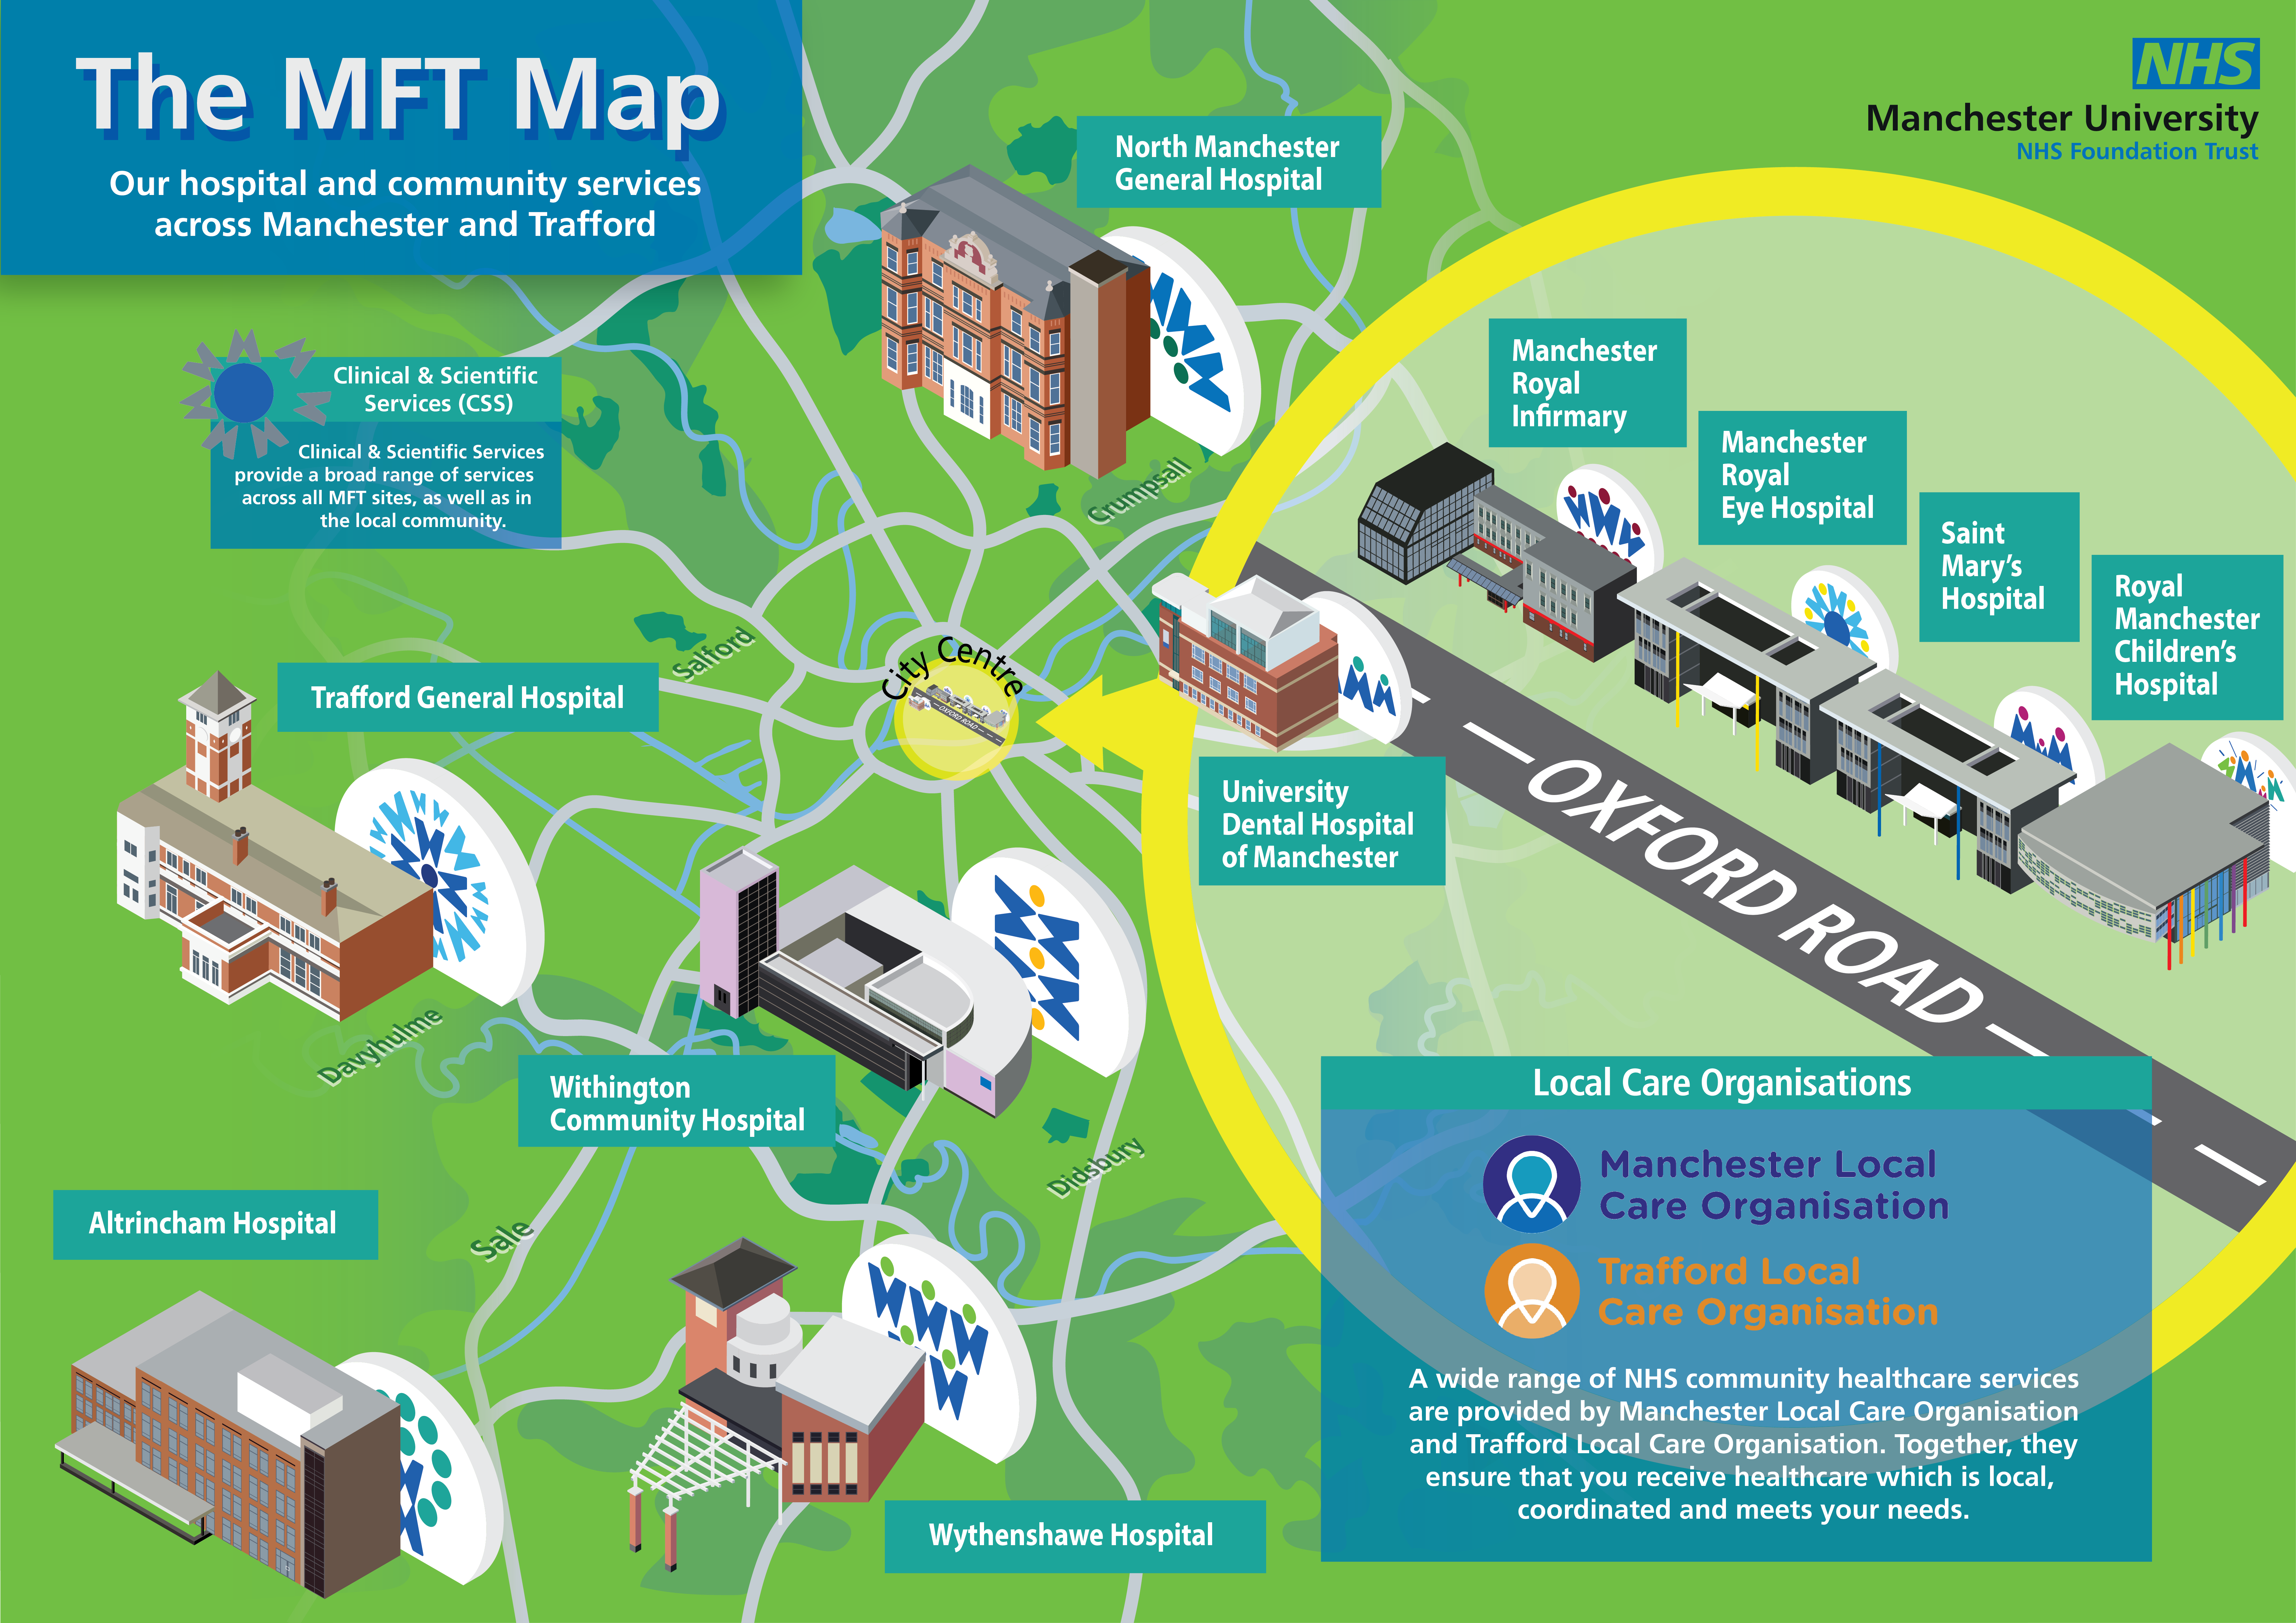 An illustrated map in an isometric style featuring the hospital and community across Manchester and Trafford